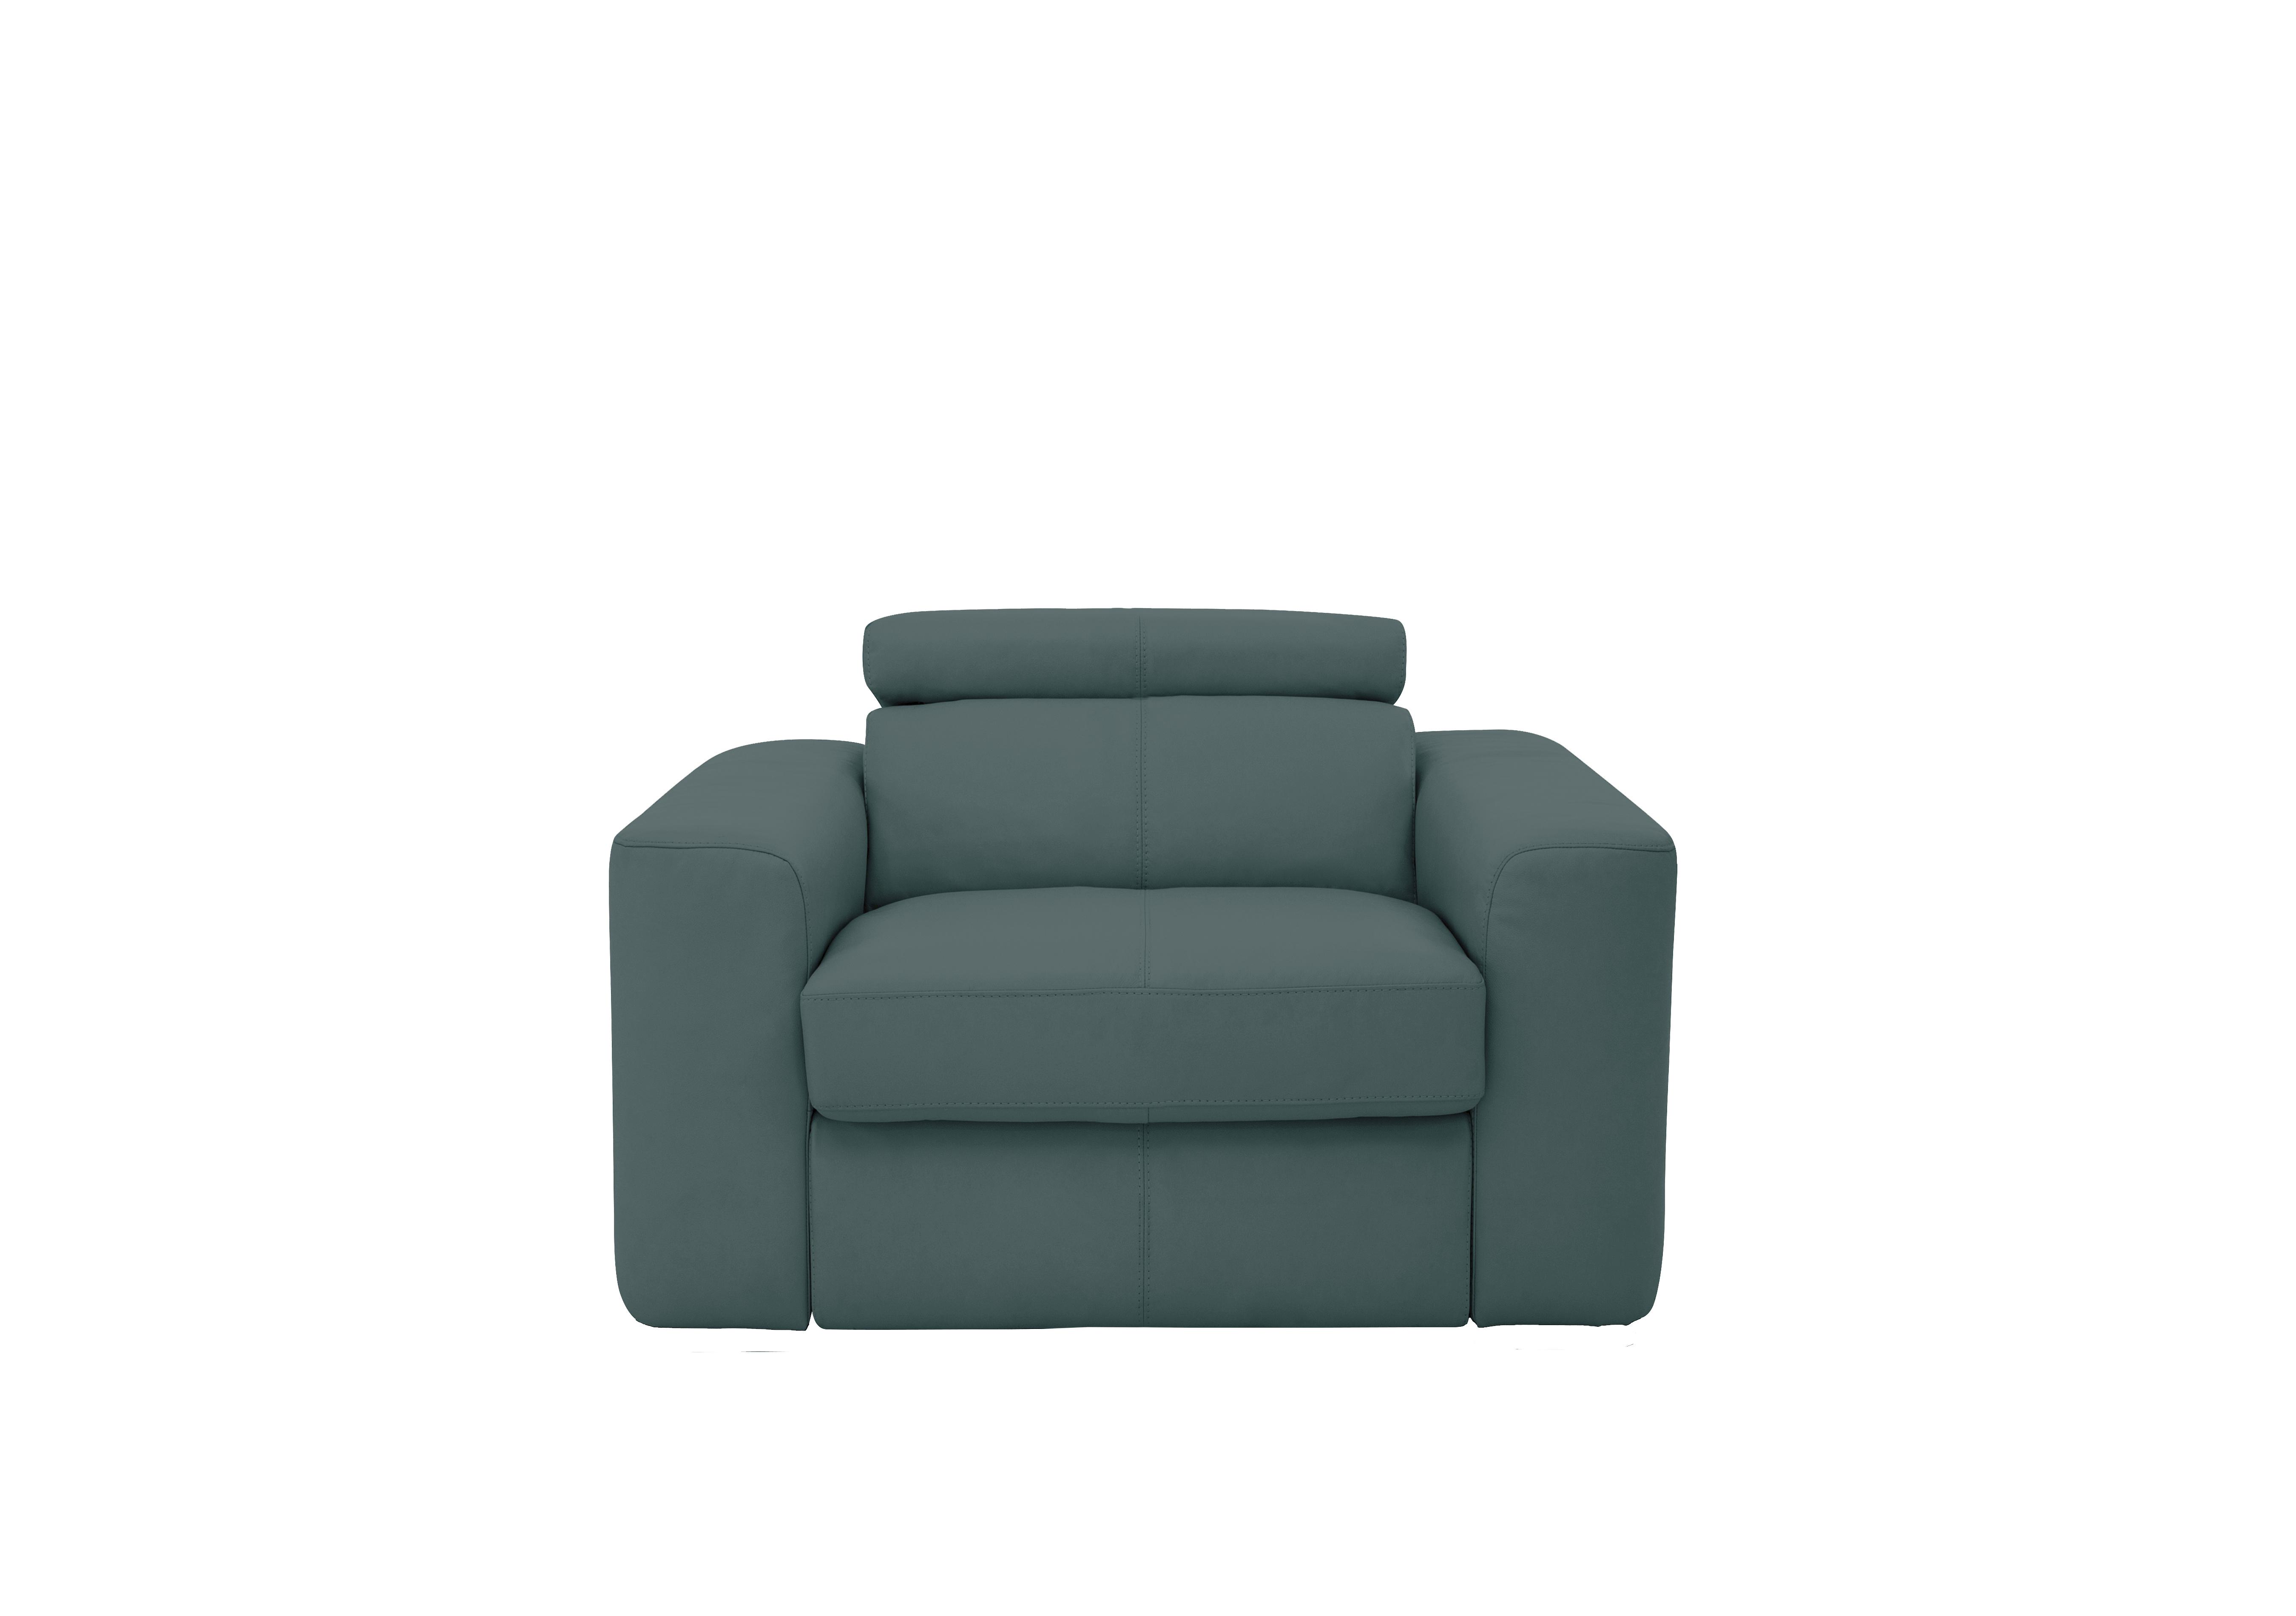 Infinity Leather Armchair in Bv-301e Lake Green on Furniture Village